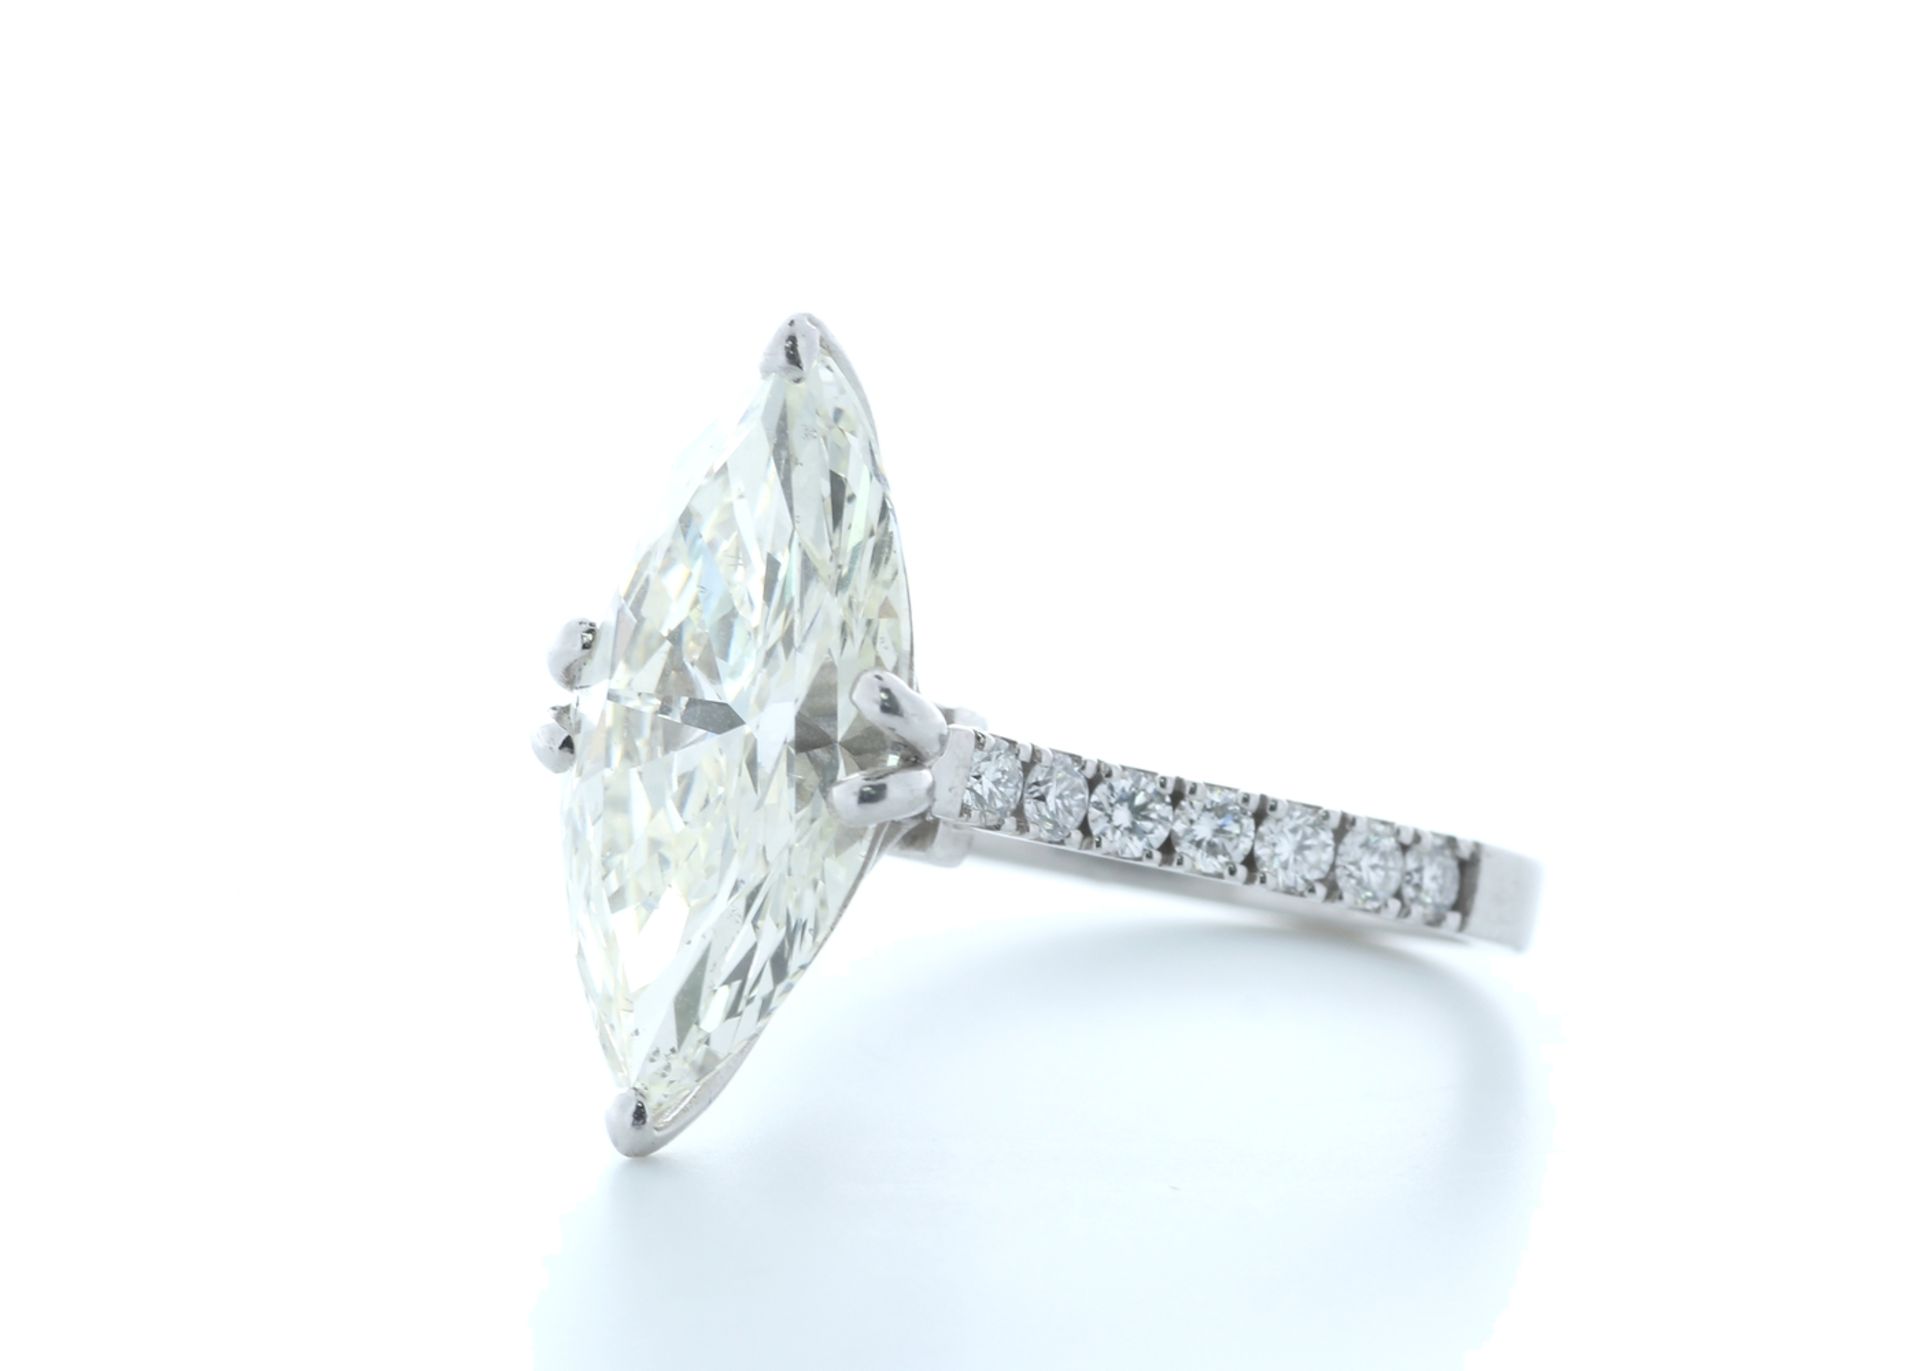 18ct White Gold Marquise Cut Diamond Ring 5.70 Carats - Valued by IDI £315,000.00 - 18ct White - Image 2 of 5